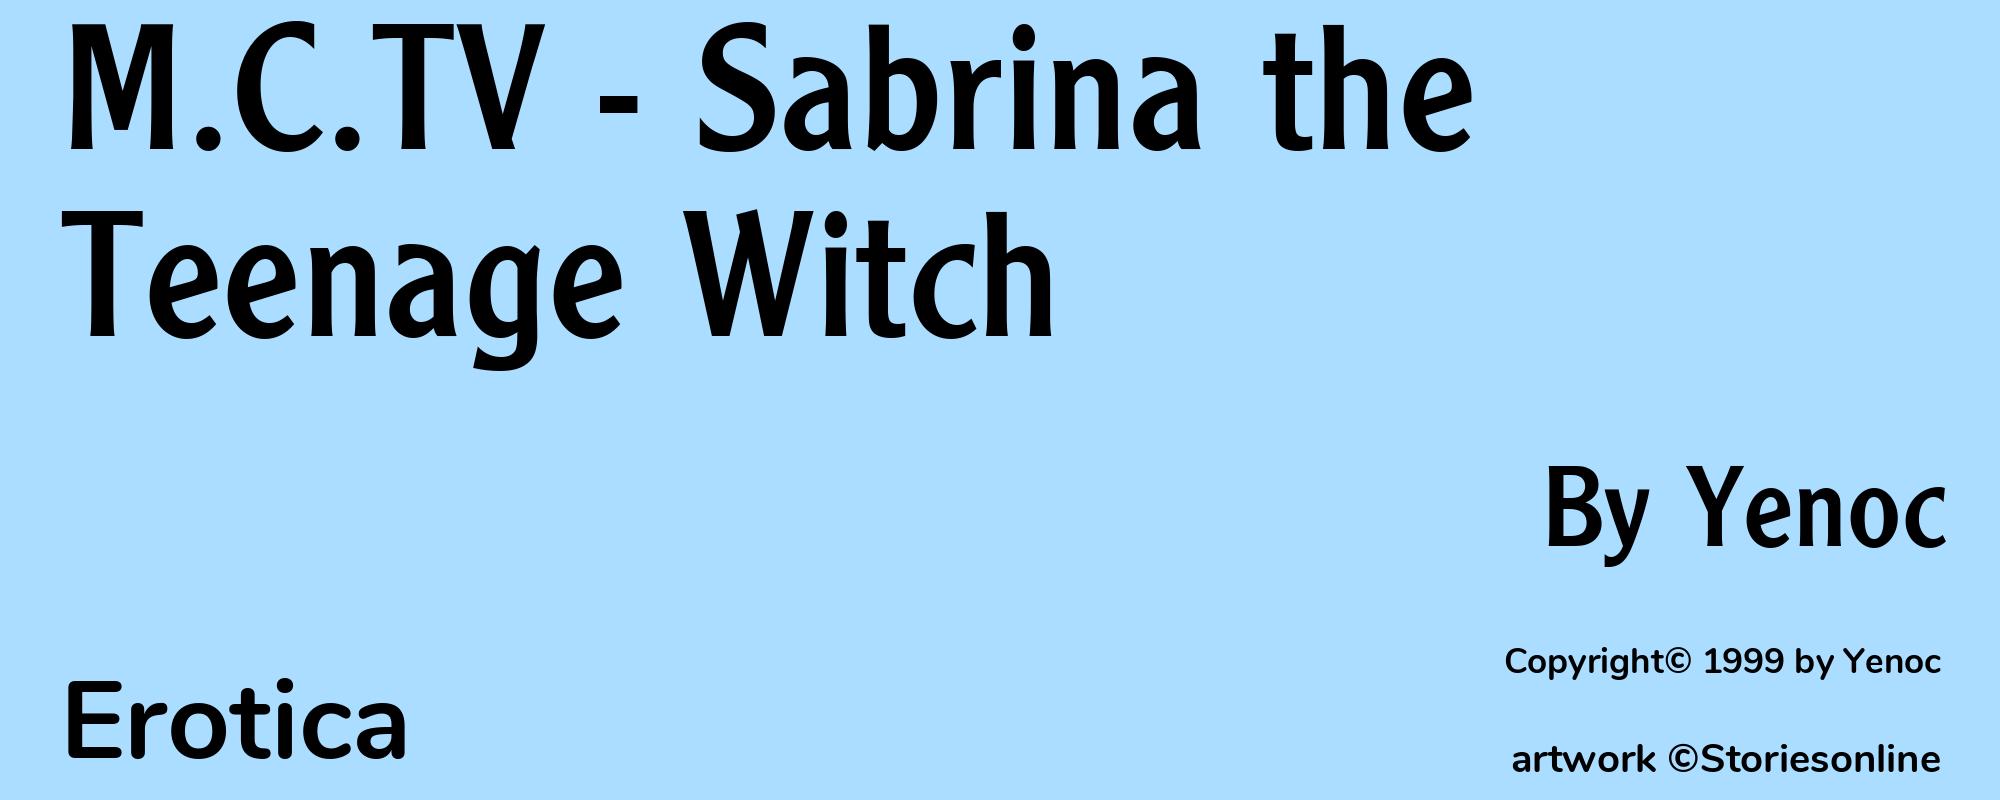 M.C.TV - Sabrina the Teenage Witch - Cover